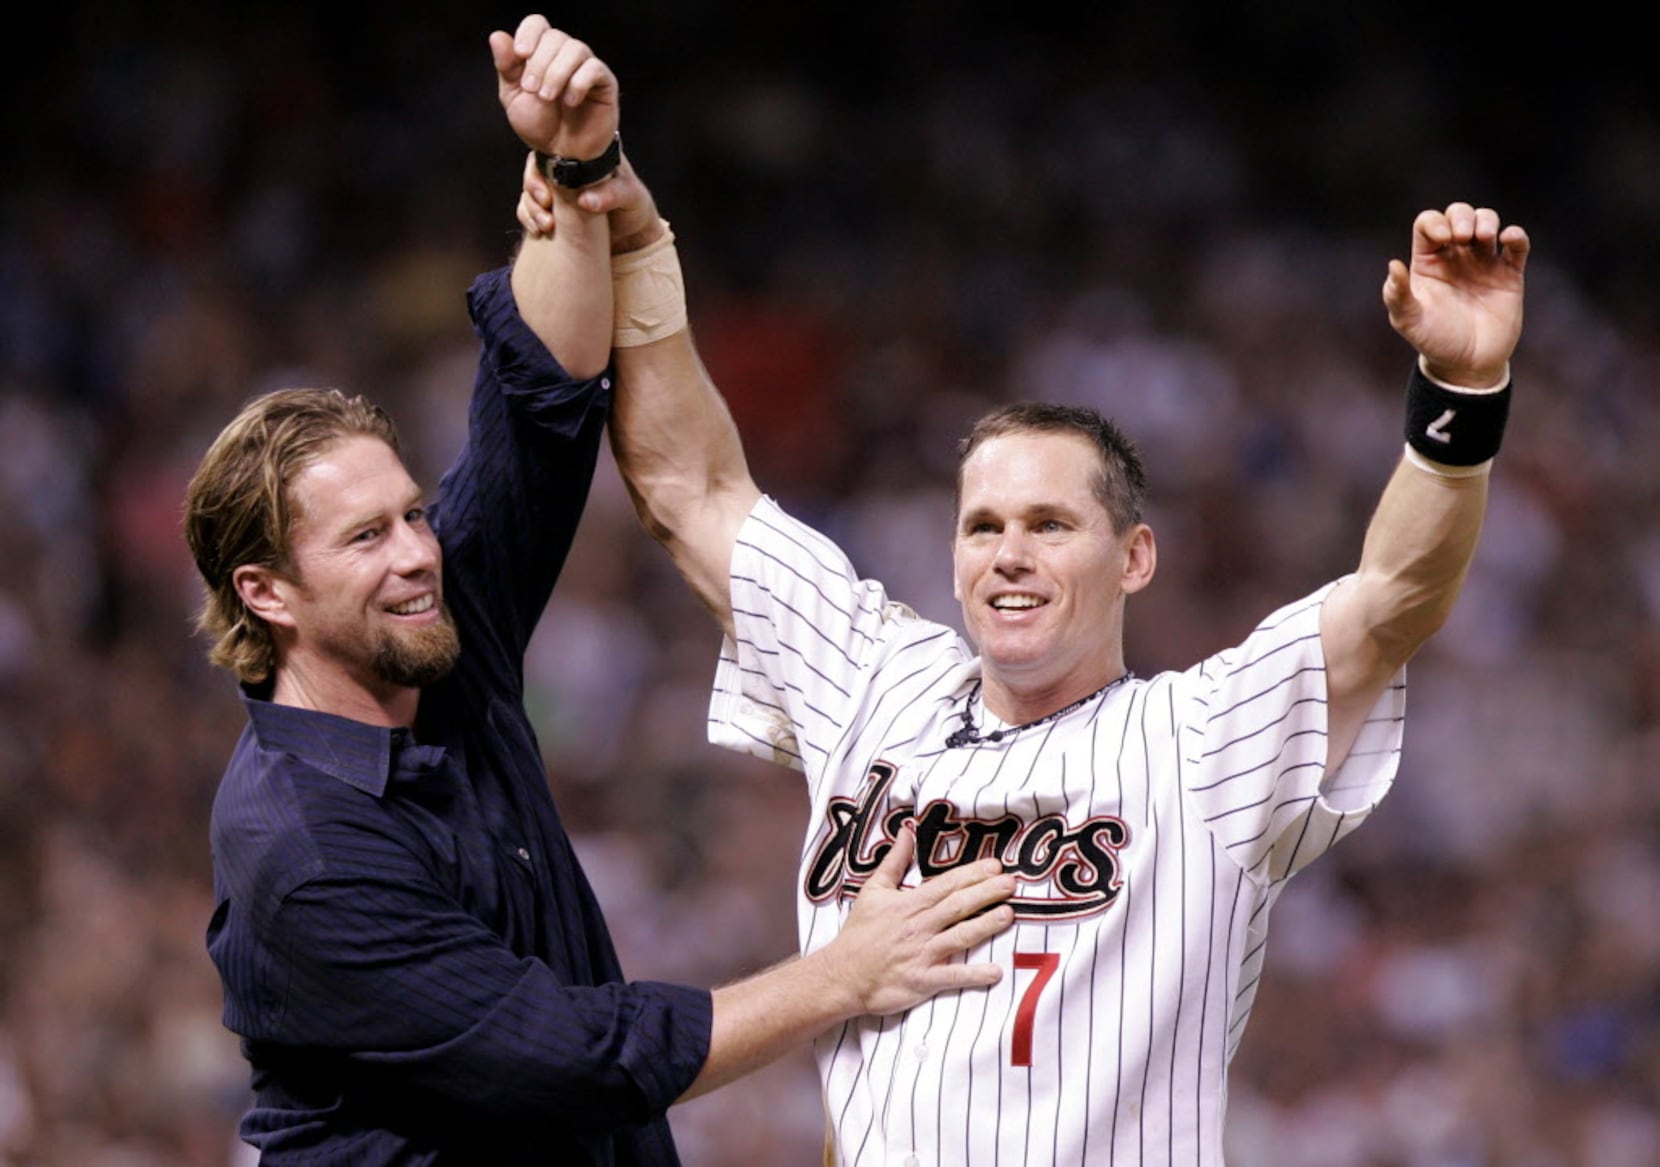 Houston to Cooperstown: The Houston Astros' Biggio and Bagwell Years [Book]